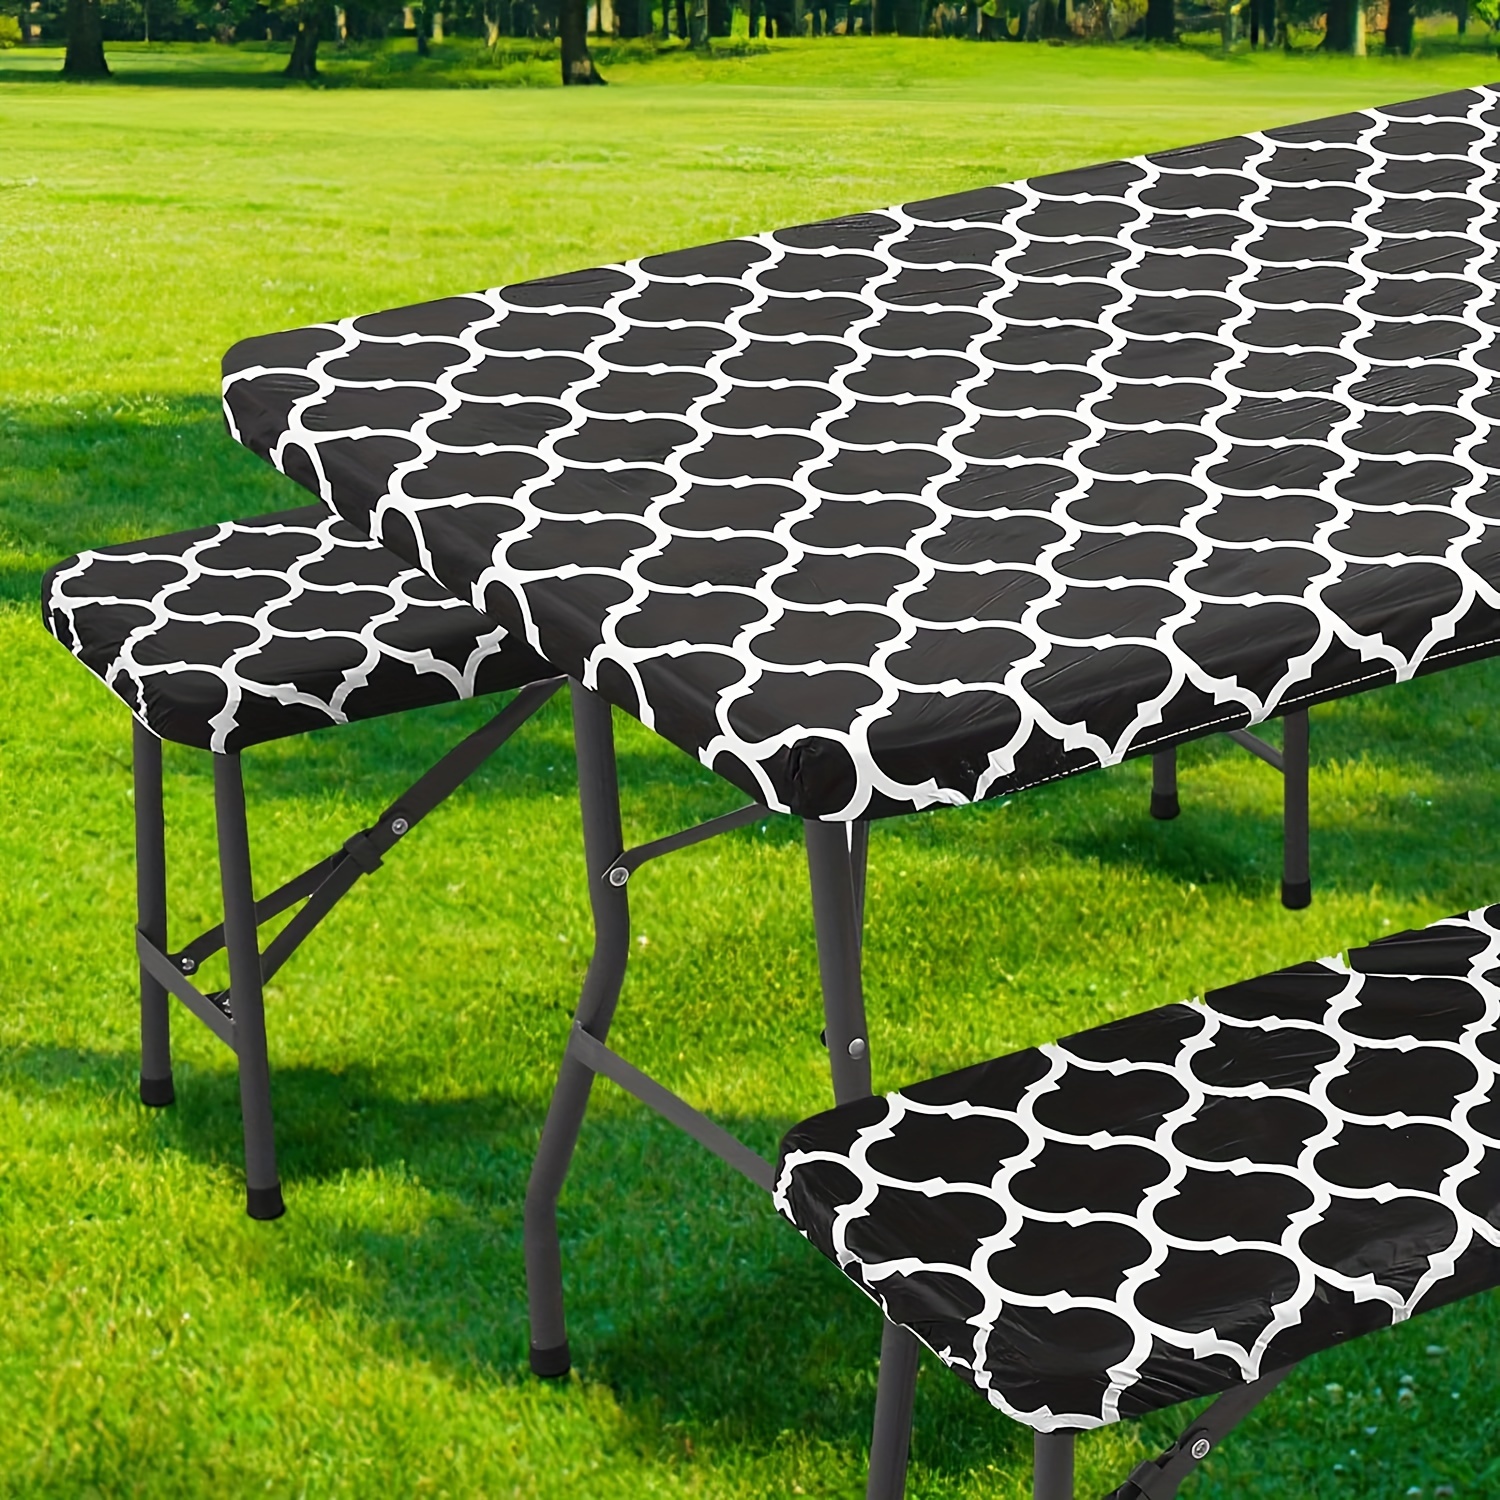 

3pcs, Picnic Tablecloth Set With Bench Covers, Waterproof Vinyl With Flannel Backing, Elastic Fitted Outdoor Table & Seat Covers, Non-slip, Windproof Tablecloth